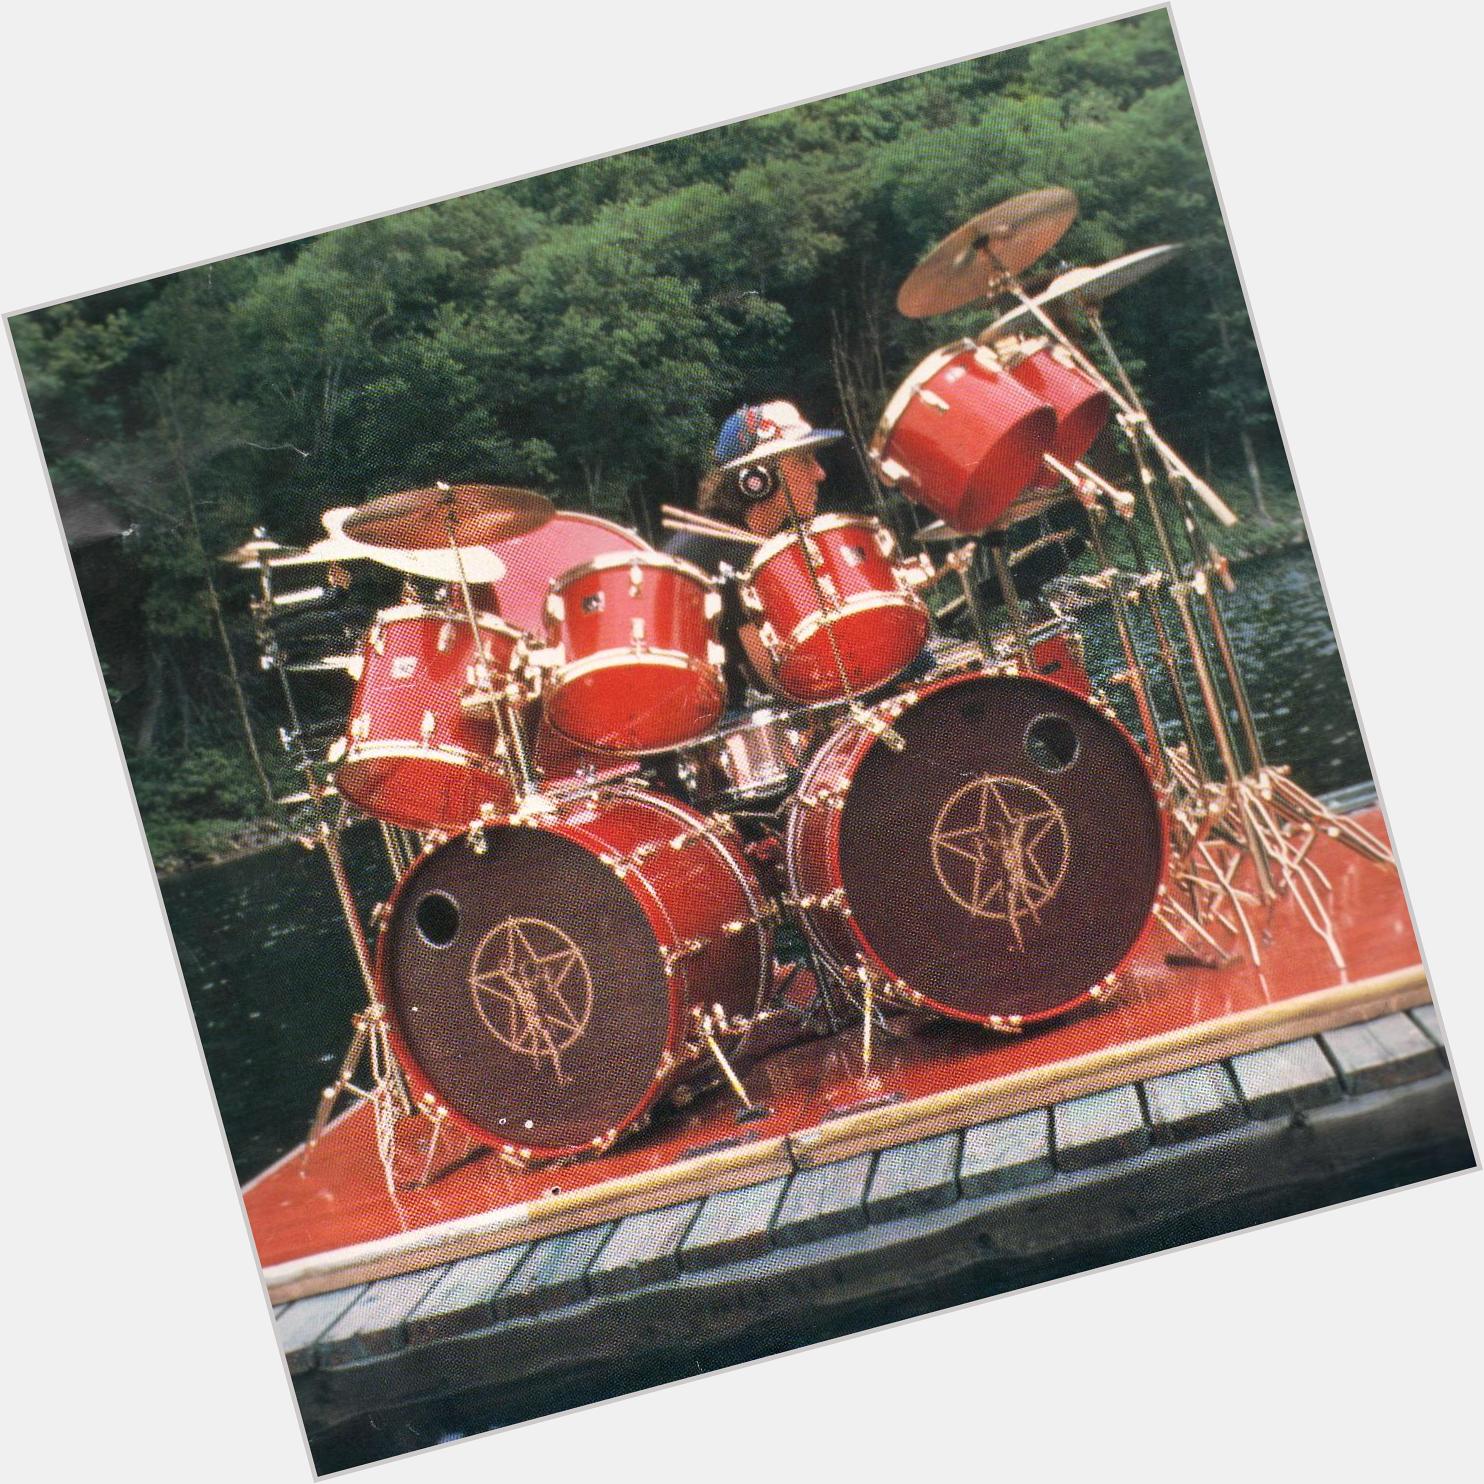 To many of us he walks on water, figuratively. Here he literally plays on water. Happy BDay Neil Peart 